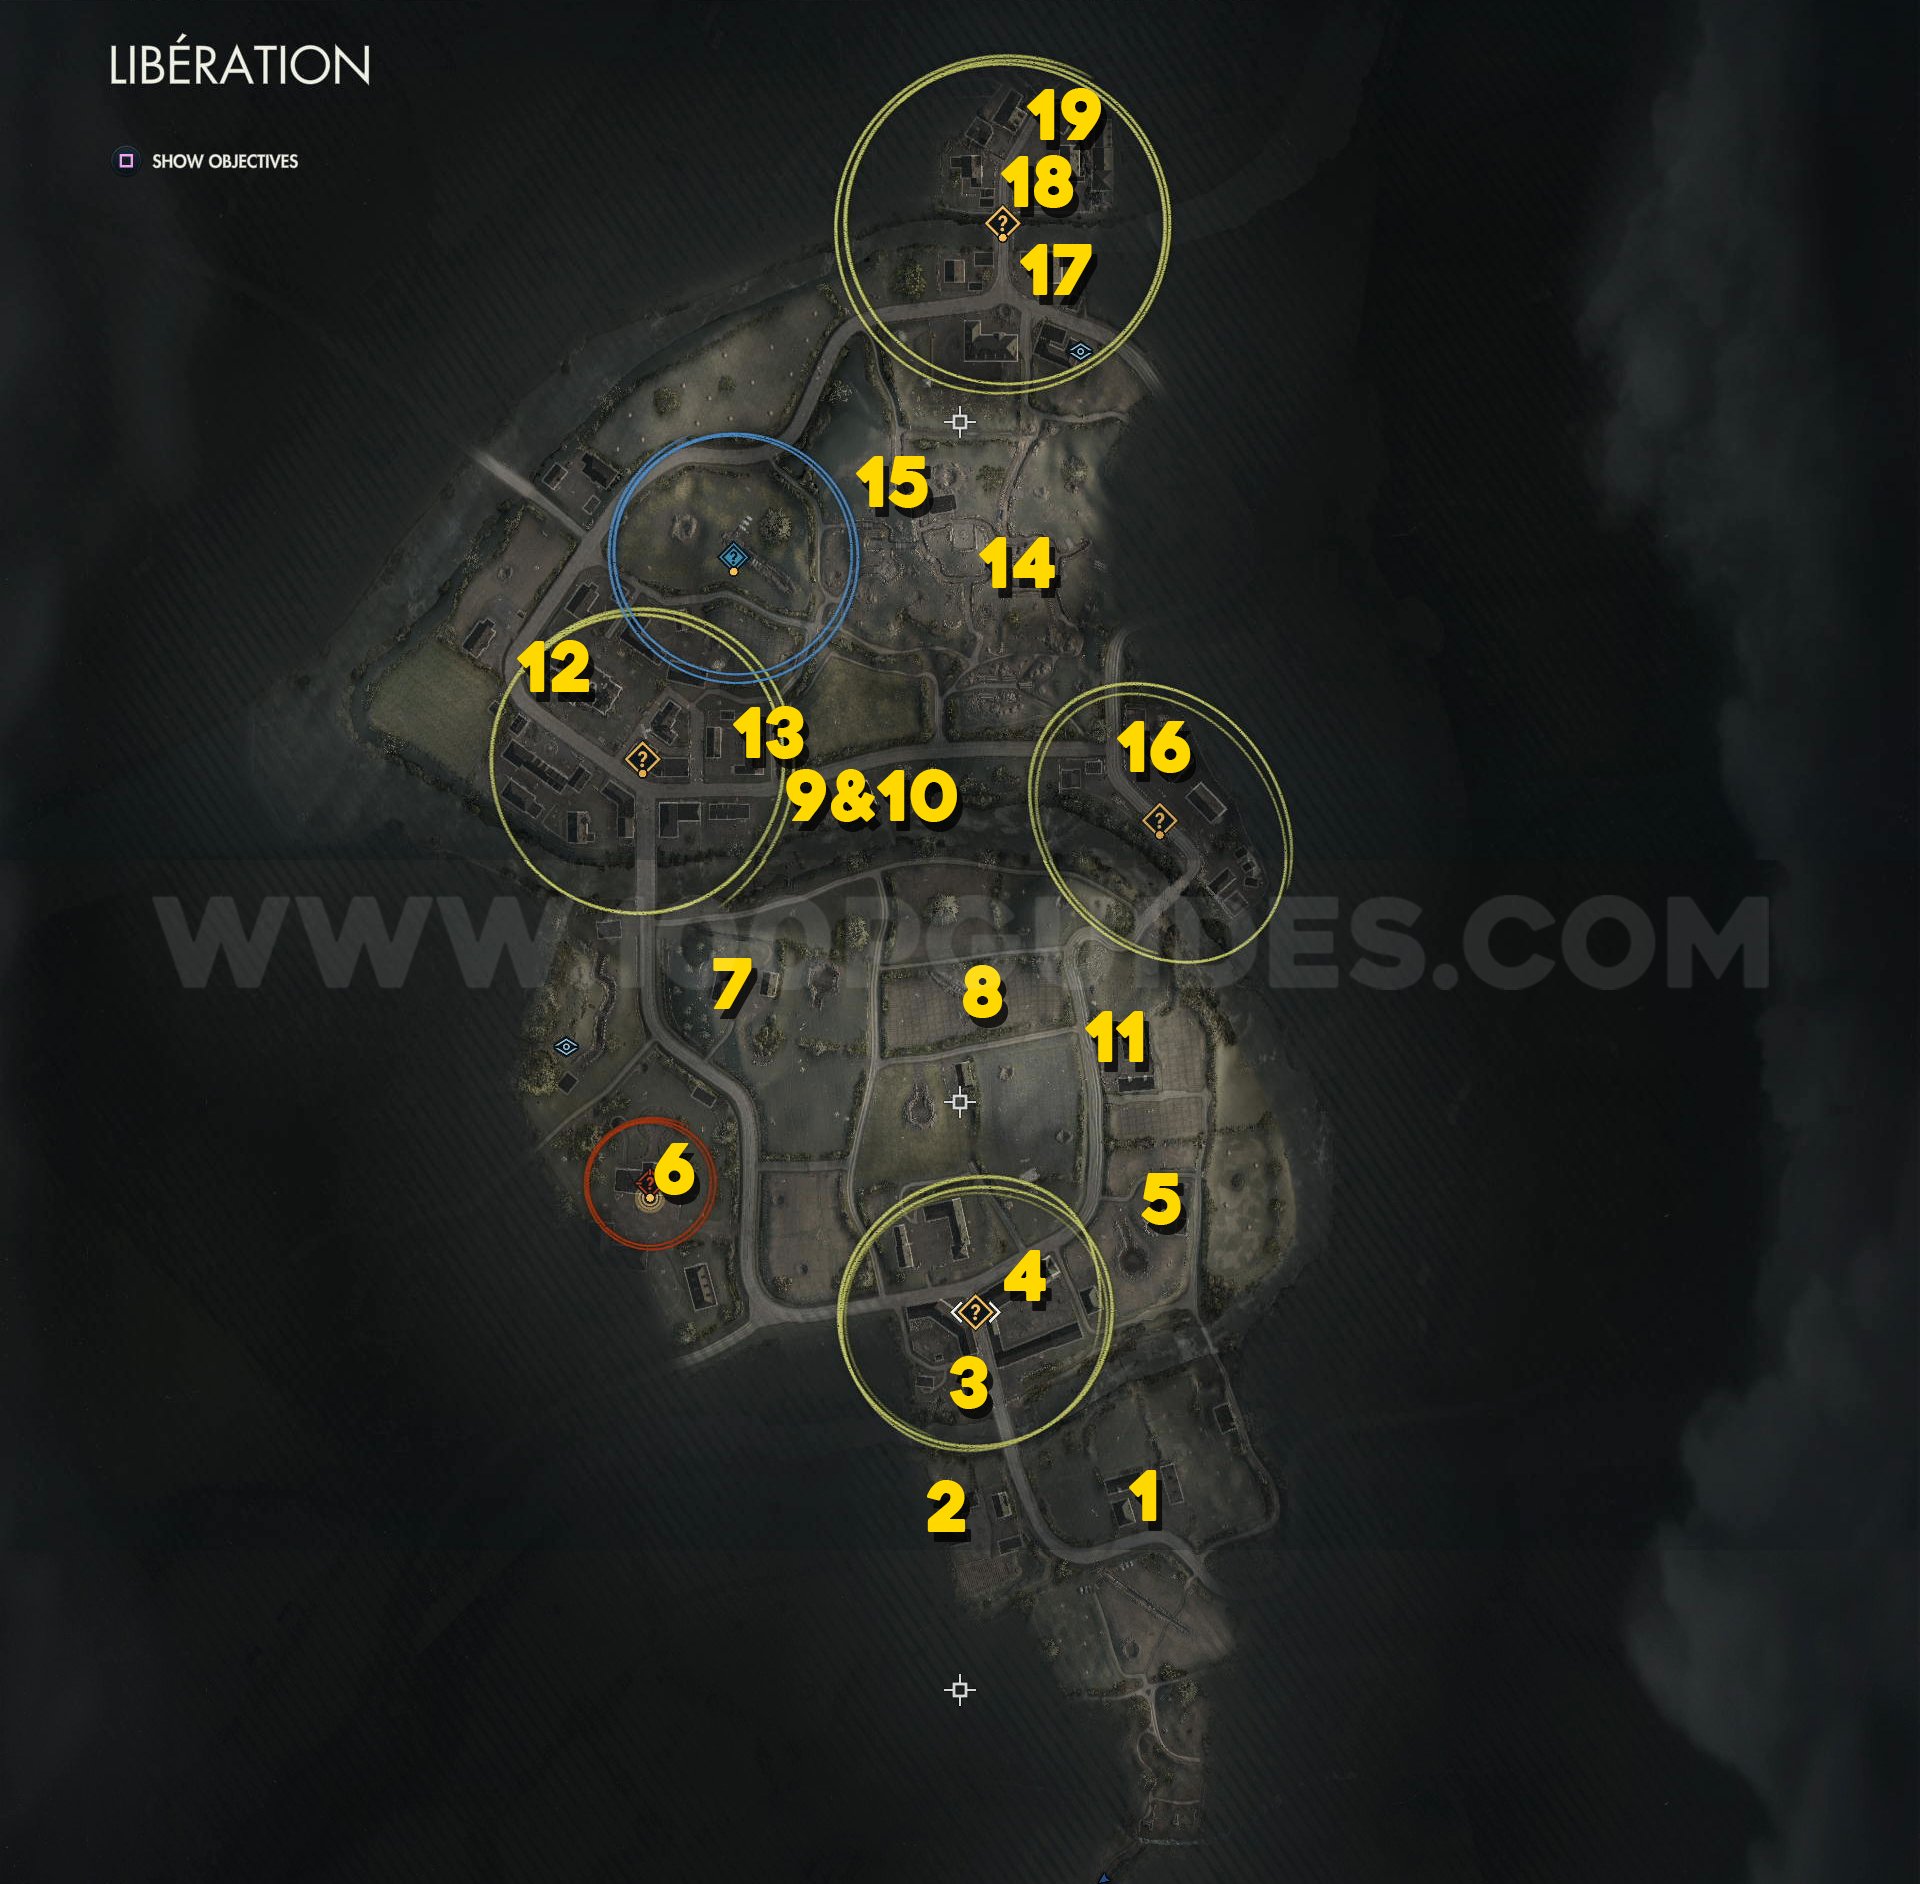 salvage Condense tactics Sniper Elite 5 Liberation (Mission 6) All Collectible Locations — 100%  Guides